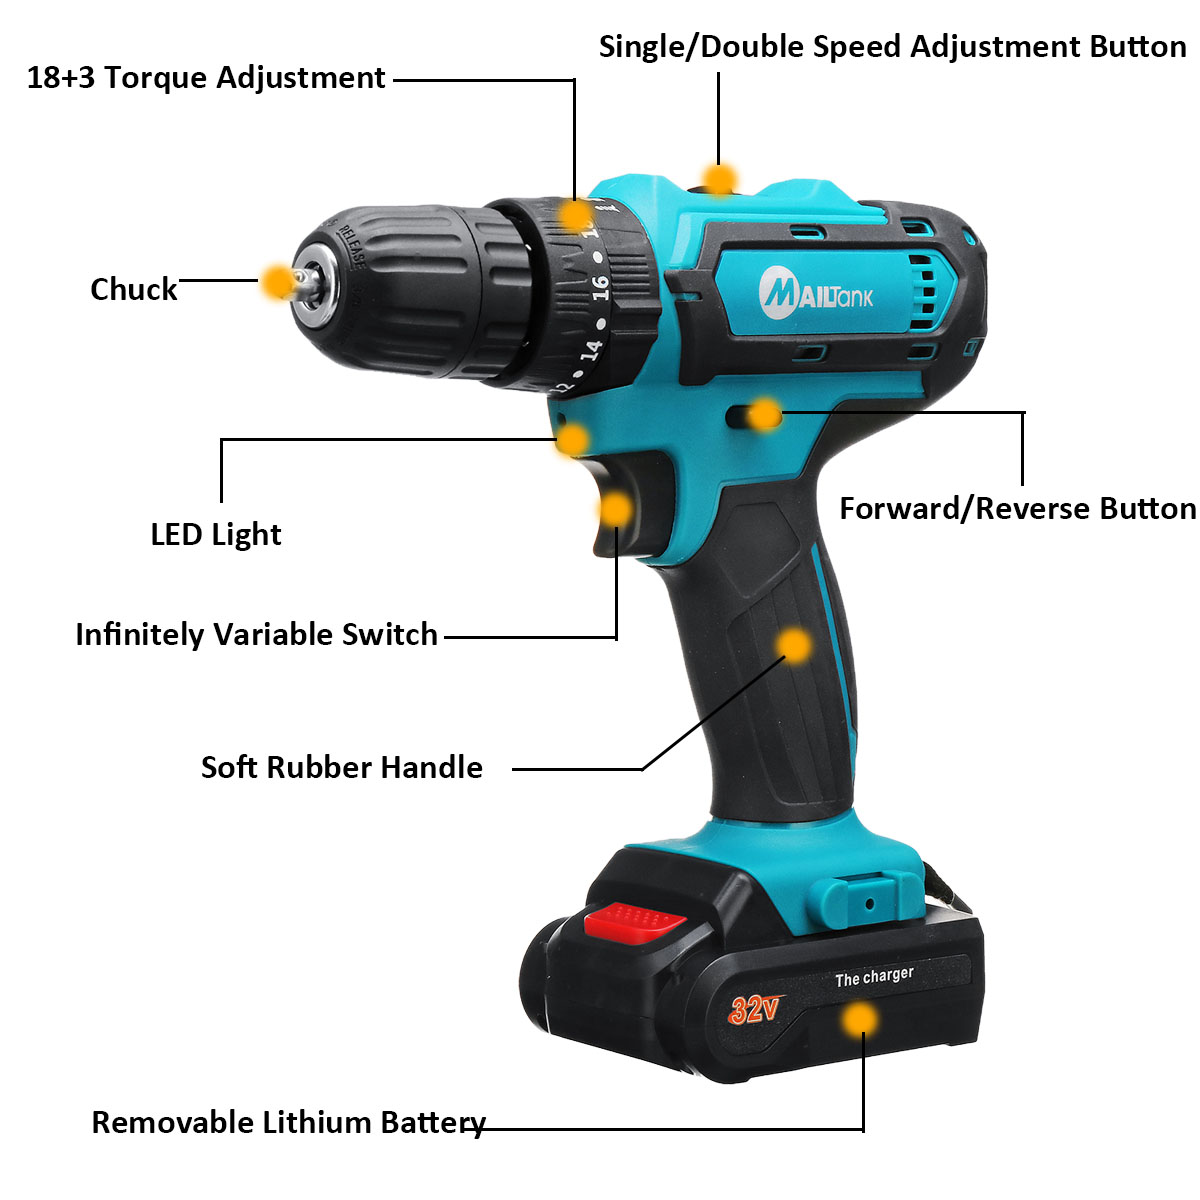 32V 2 Speed Power Drills 6000mah Cordless Drill 3 IN1 Electric Screwdriver Hammer Hand Drill 2 Batteries 15